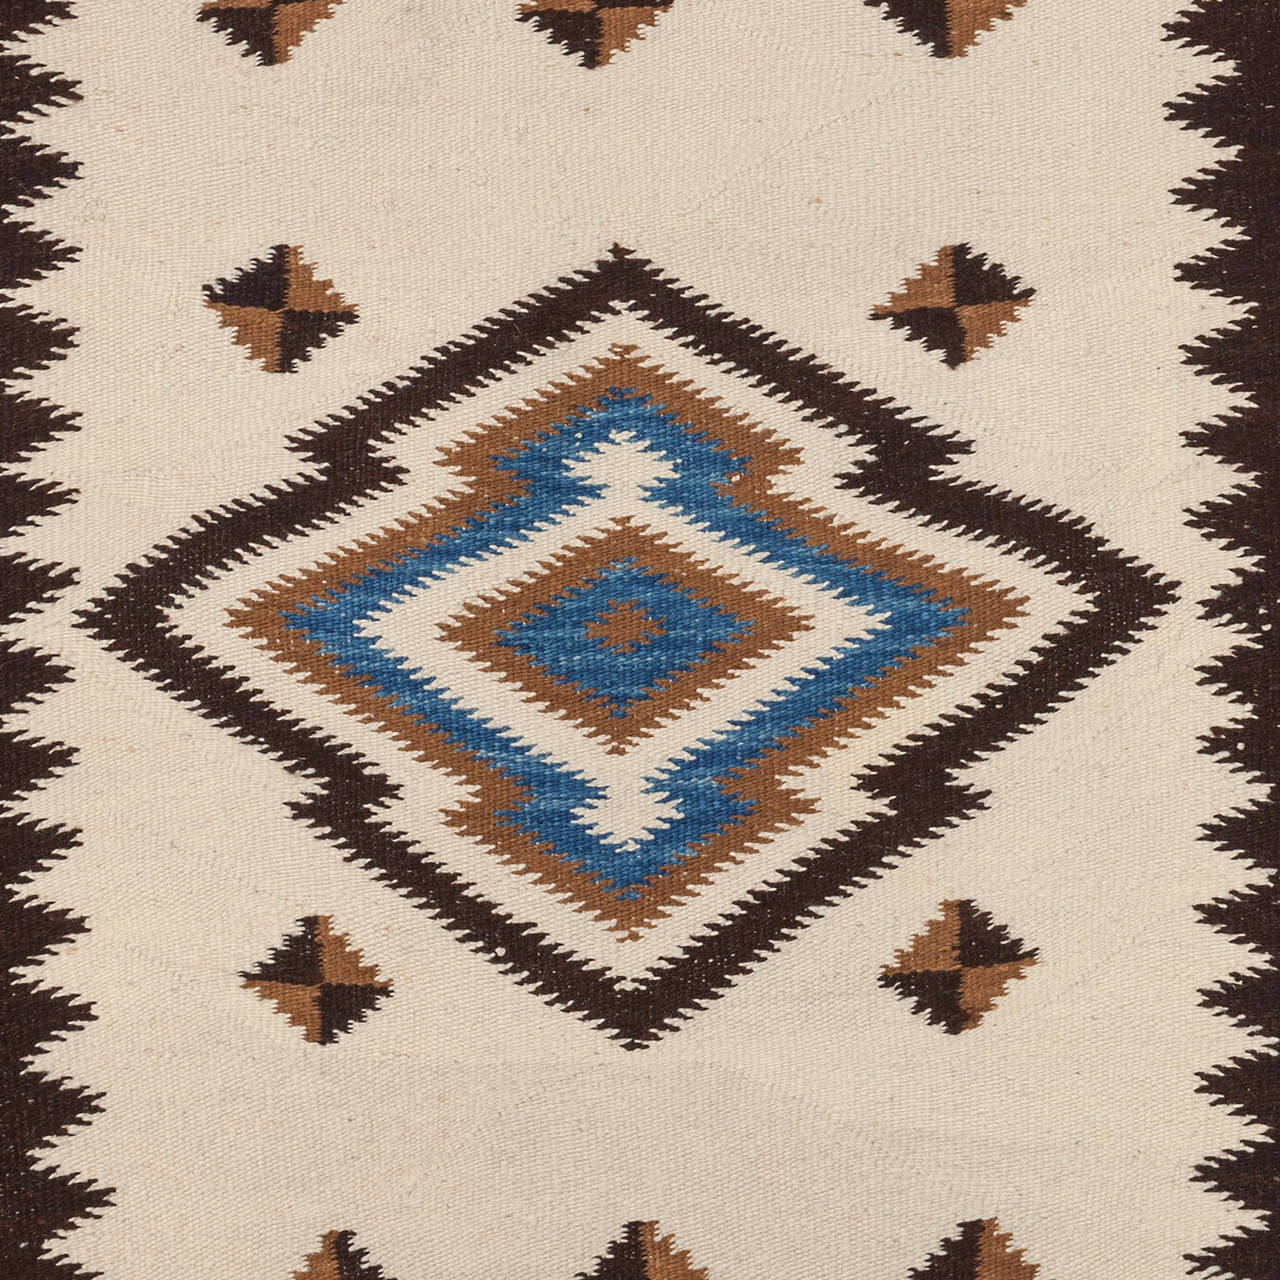 This is an excellent example of a Mayo textile dating from the early 20th Century. The Mayo are an Uto-Aztecan speaking indigenous group from northern Mexico. Mayo textiles were woven on an upright loom using techniques similar to those found in